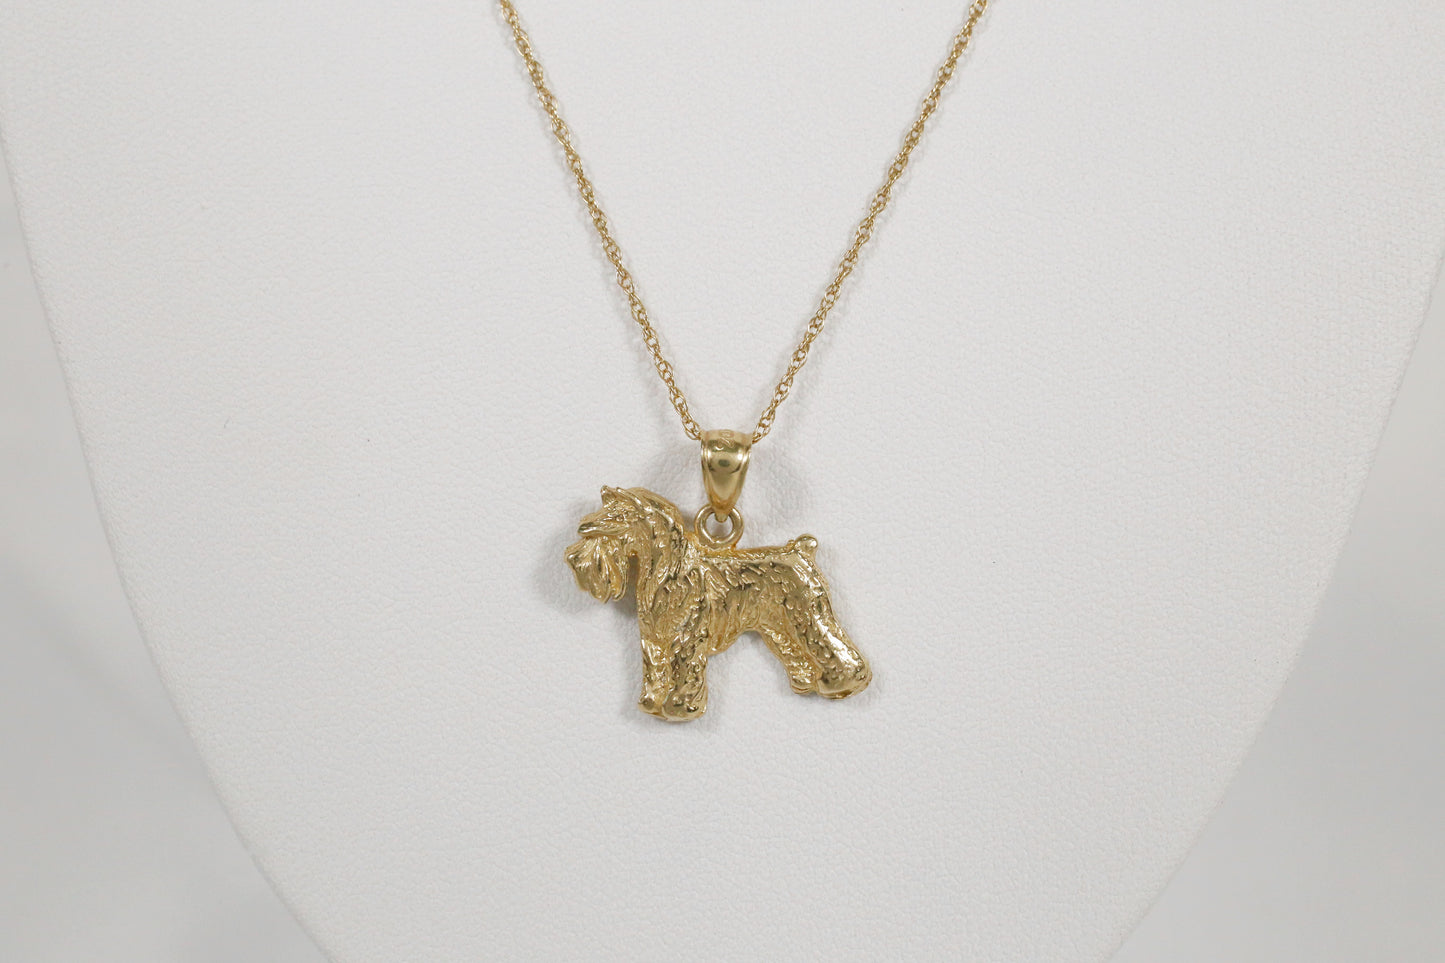 14k Yellow Gold Schnauzer Dog Pendant Necklace, 18 inches - 3.2g